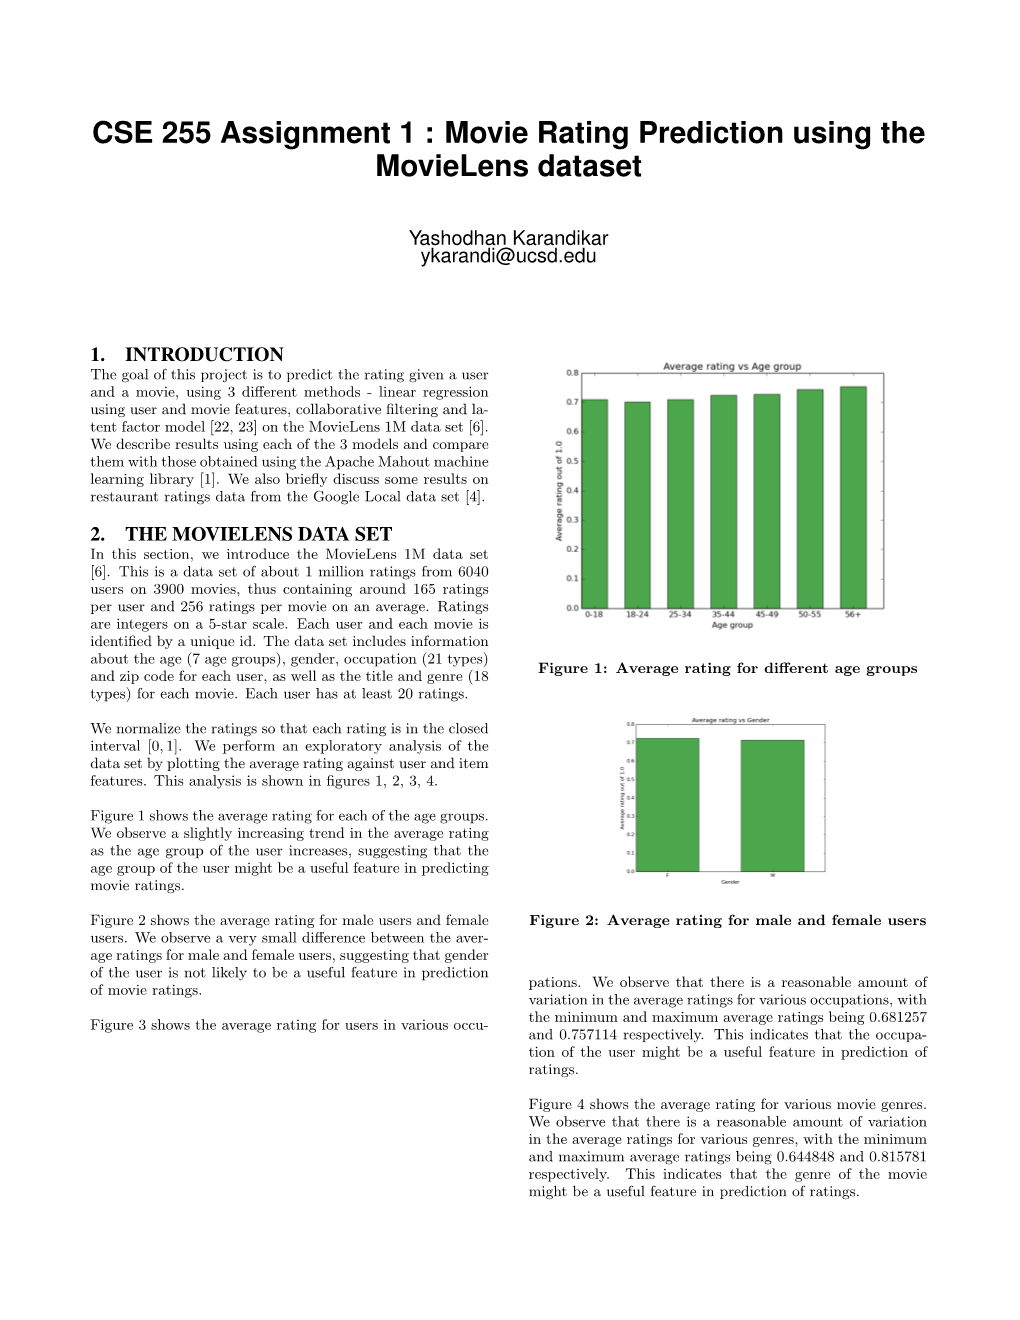 CSE 255 Assignment 1 : Movie Rating Prediction Using the Movielens Dataset